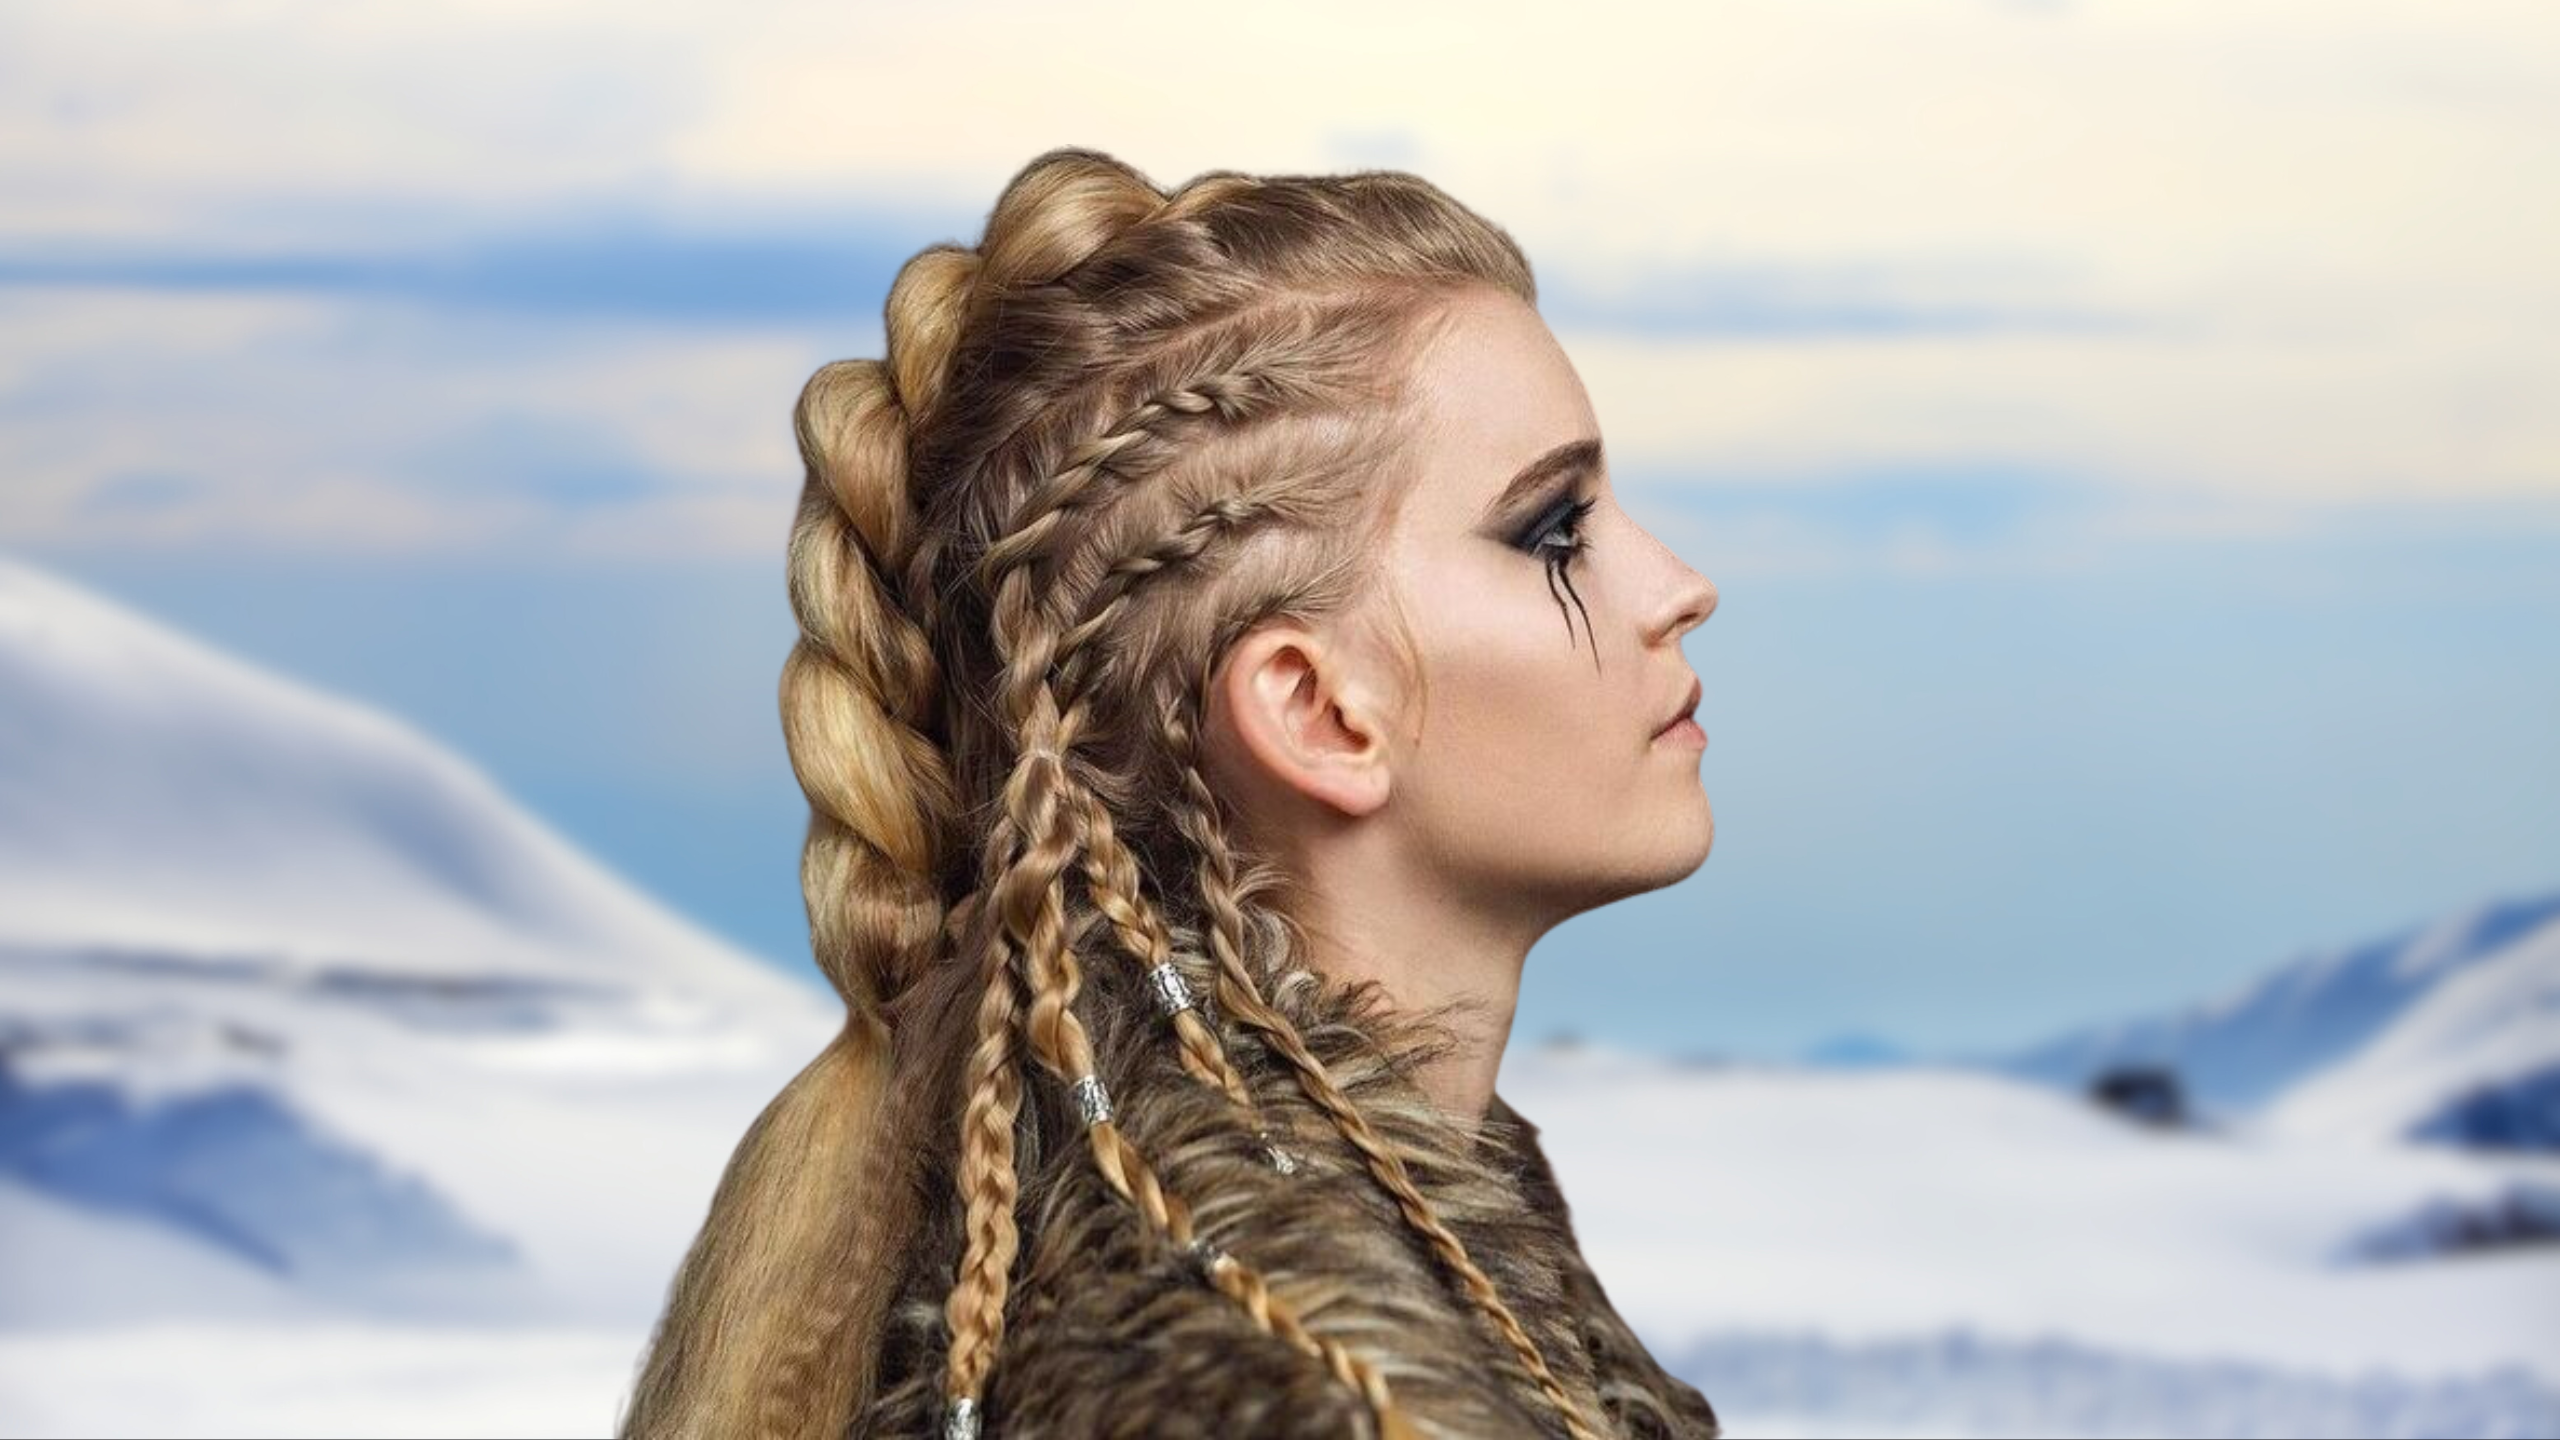 Braids, Beads, and Boldness: 30 Viking Hairdos for Ladies